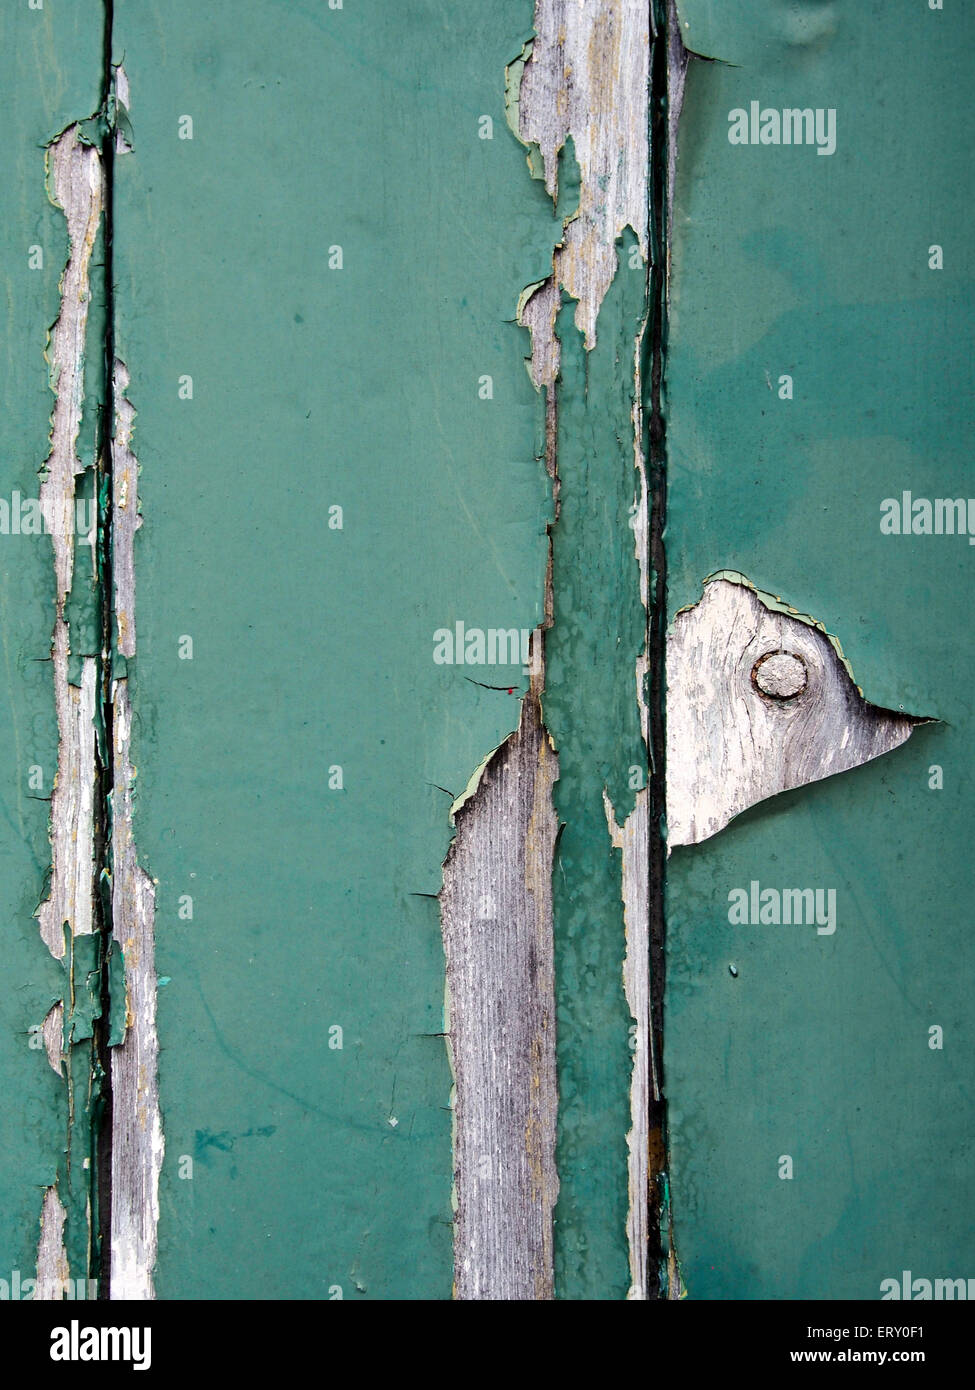 Green paint flaking off an old wooden door showing grey undercoat and primer underneath. Stock Photo